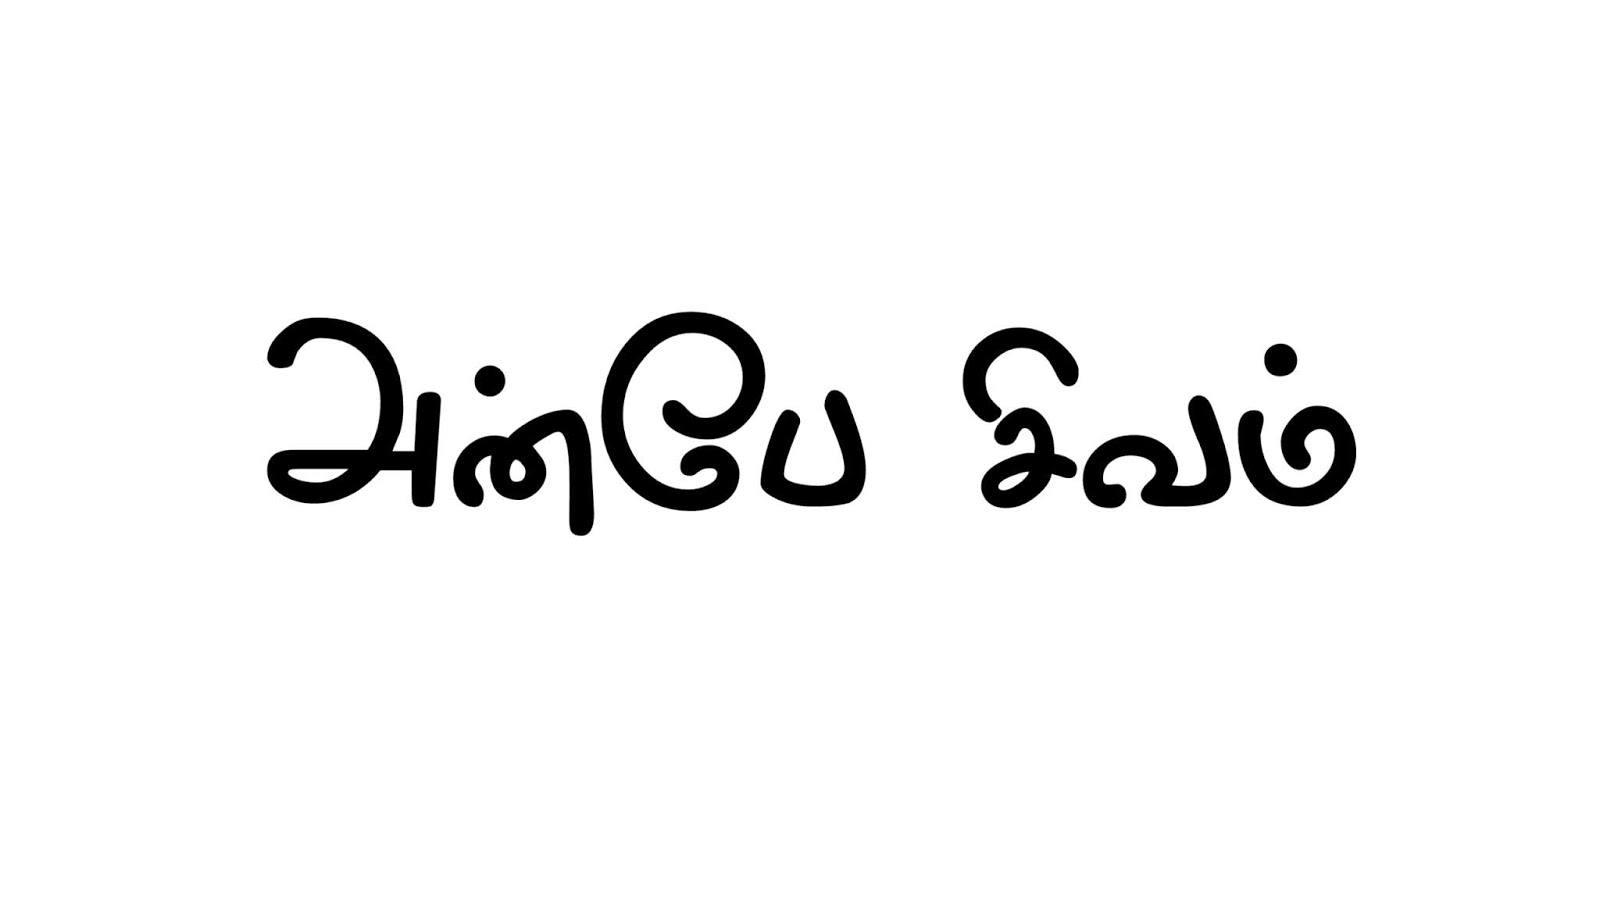 Download Tamil font ttf collection 12